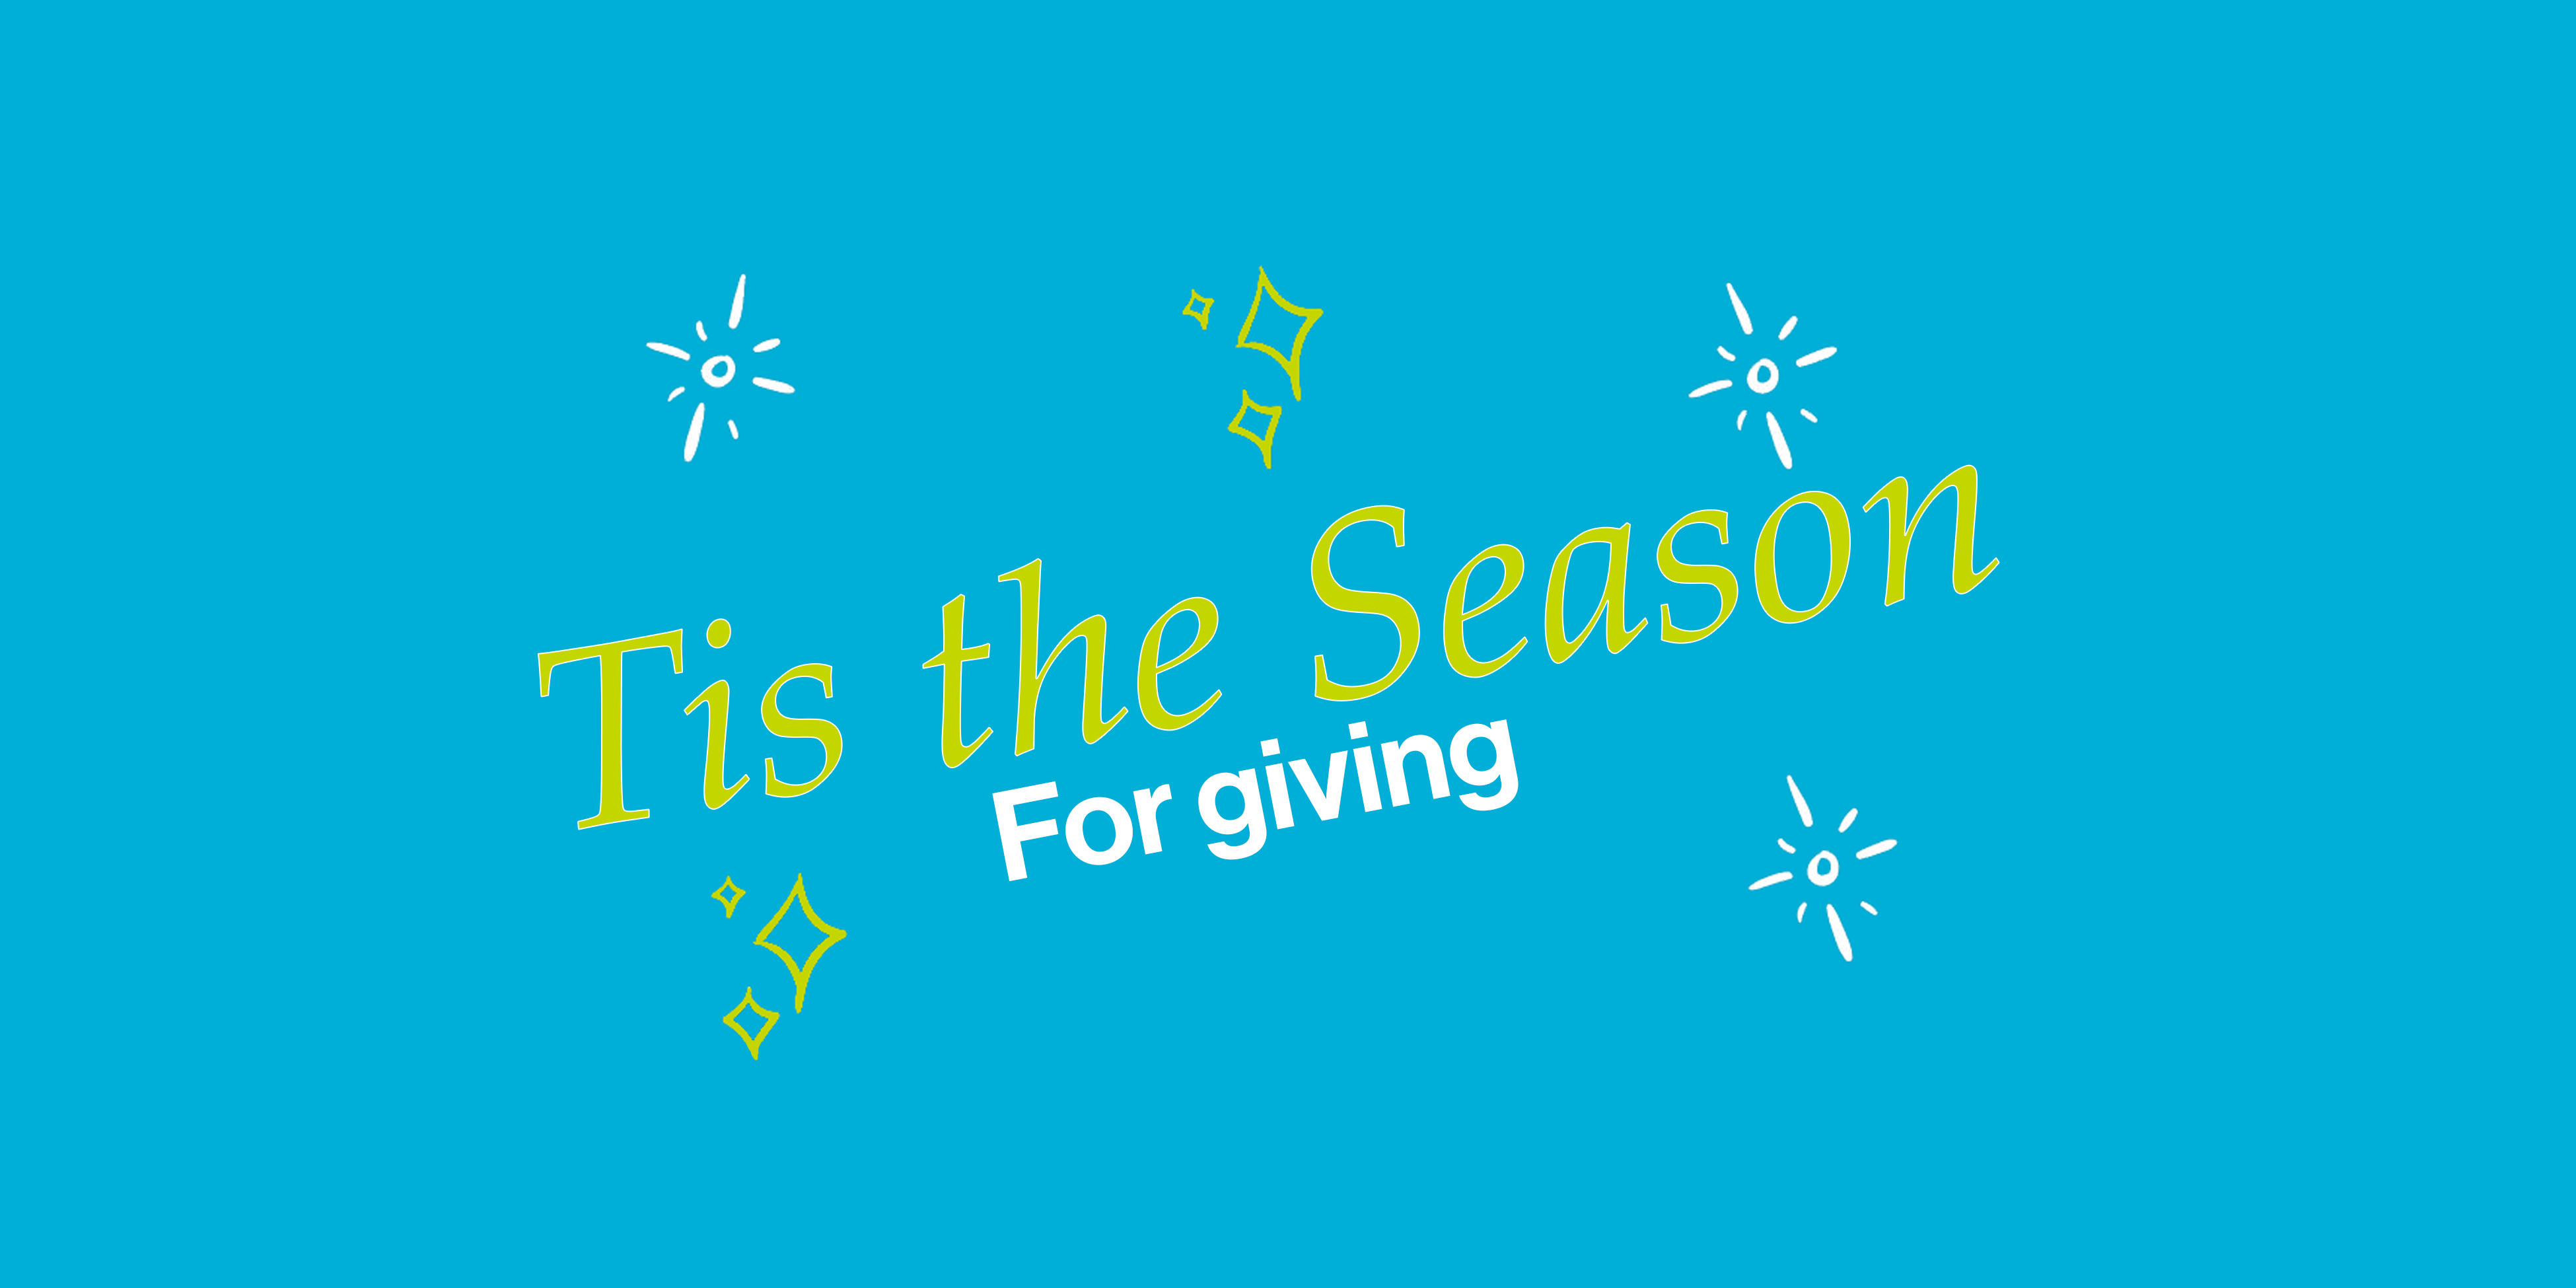 You are currently viewing ‘Tis the Season for Giving